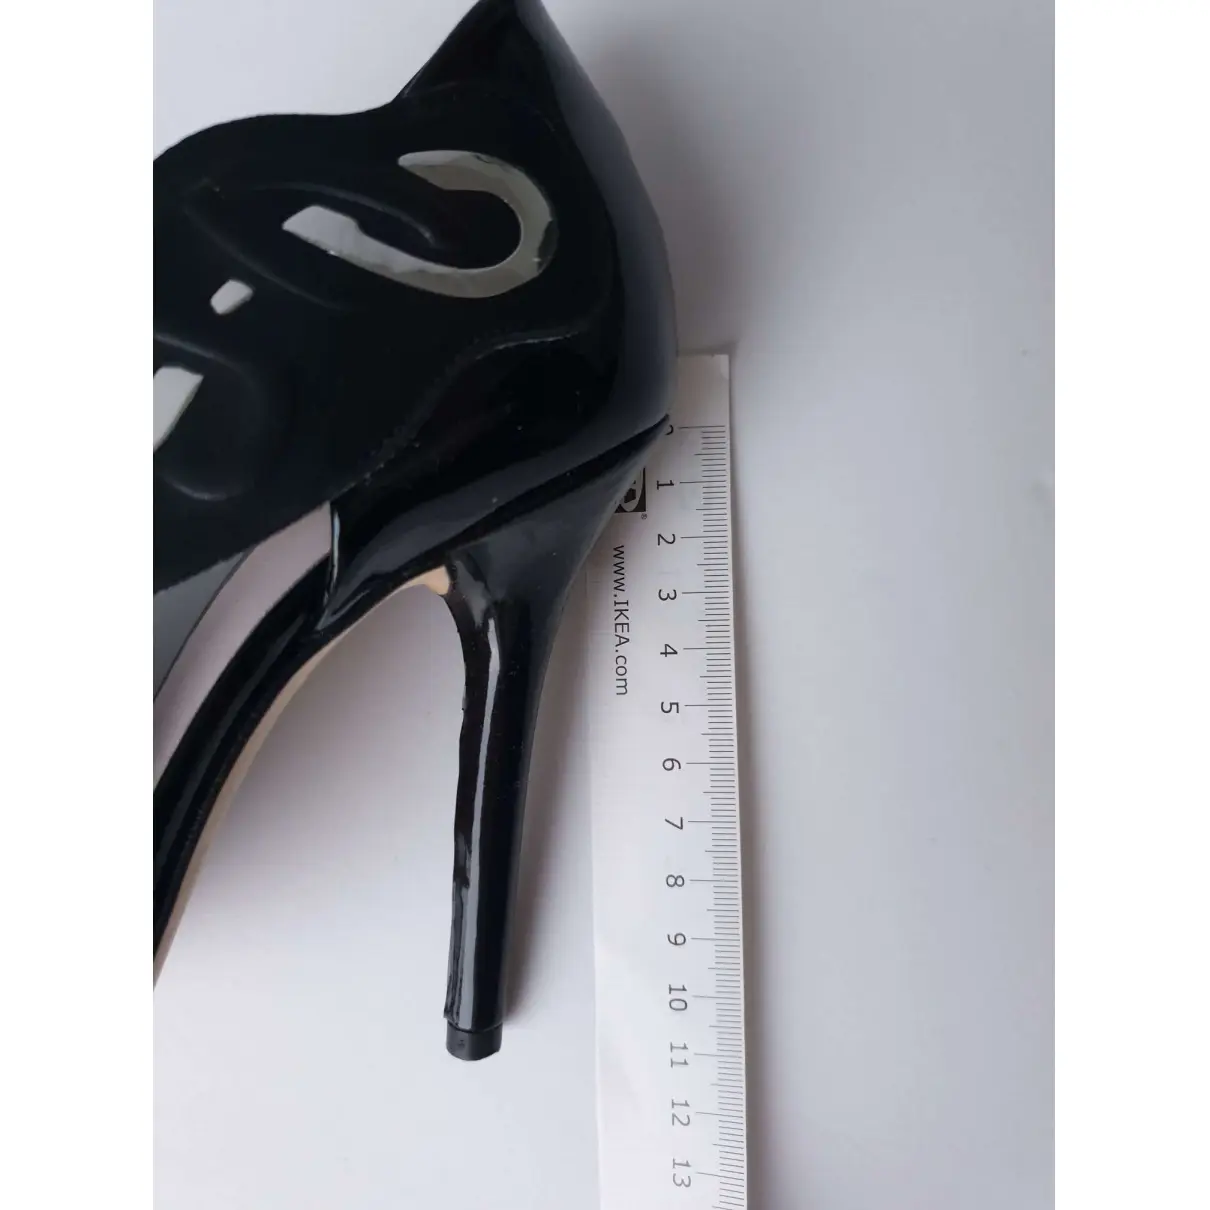 Patent leather heels Christopher Kane